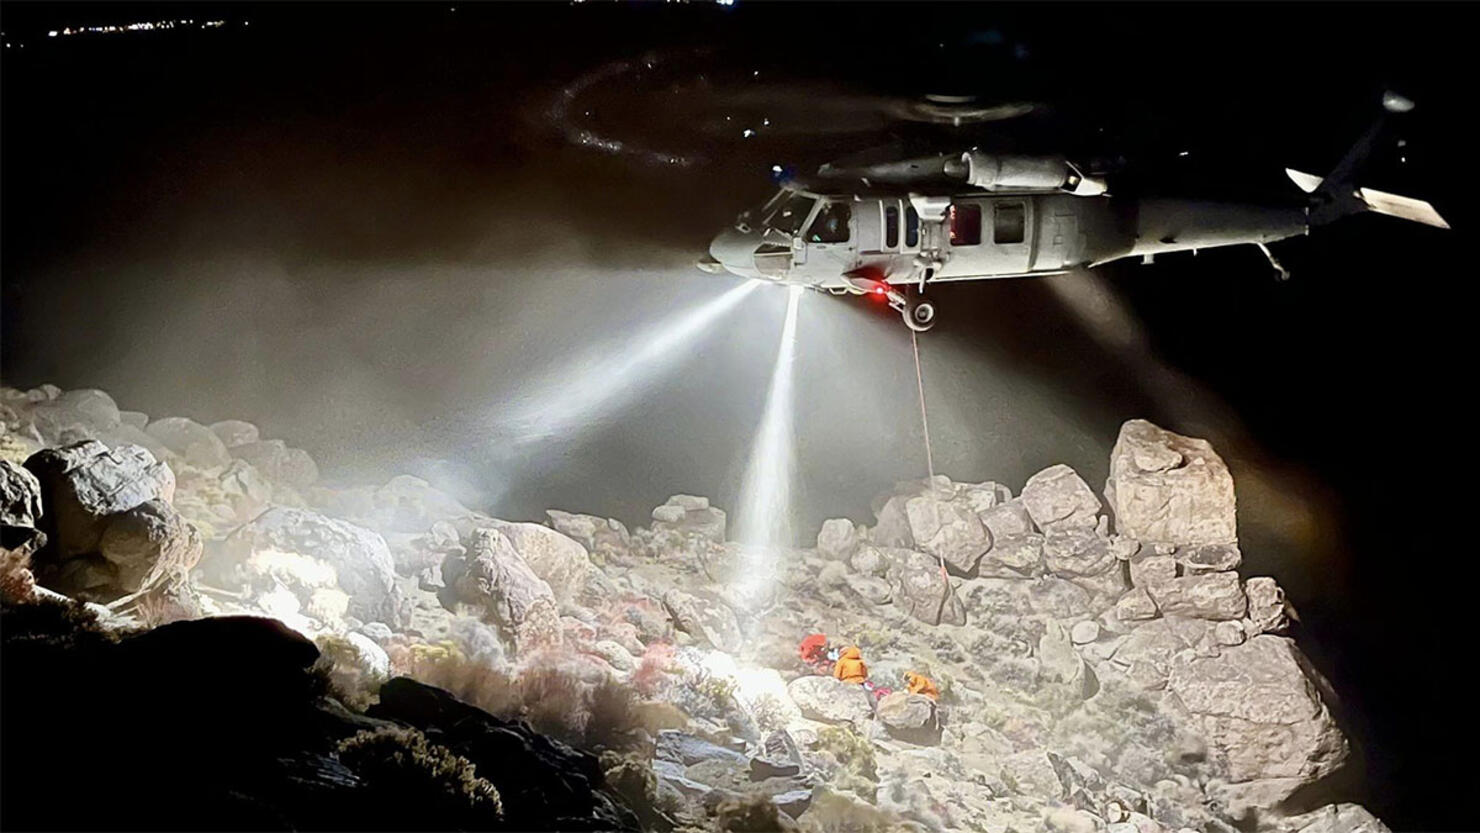 Rescue workers free a hiker trapped under a boulder.